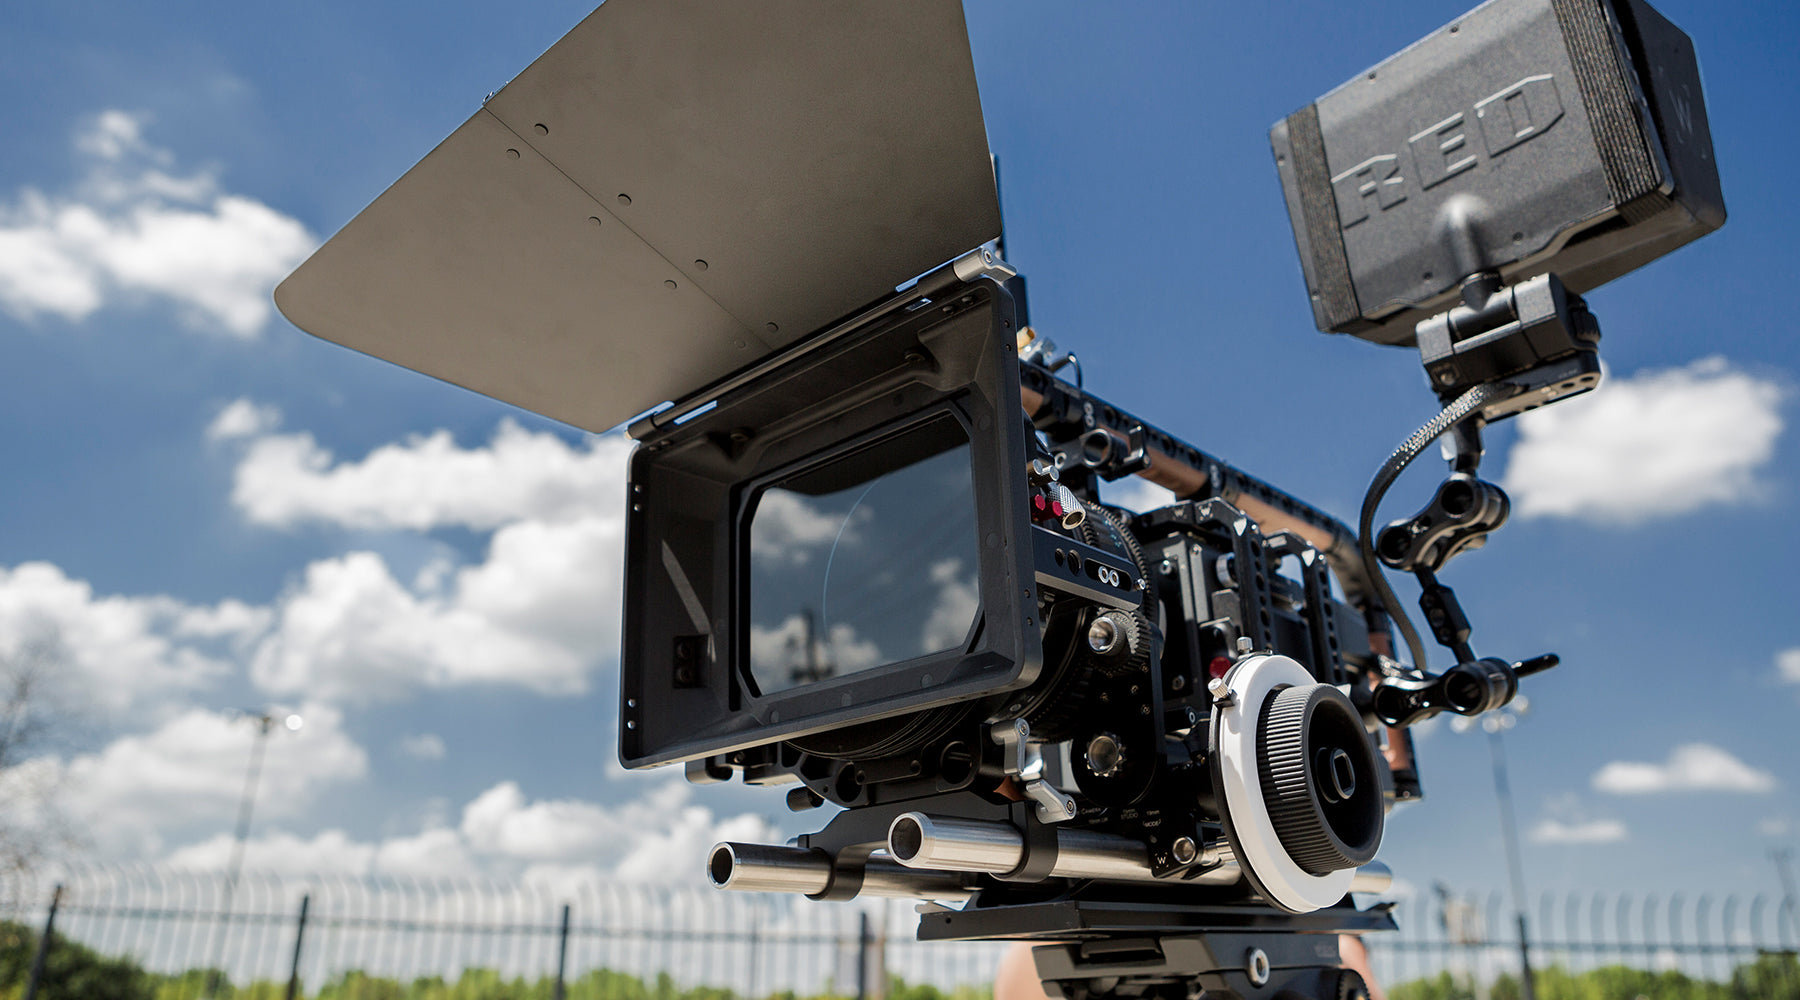 SHAPE Swing-Away Matte Box Review – Great Cost/Feature Ratio on a Budget